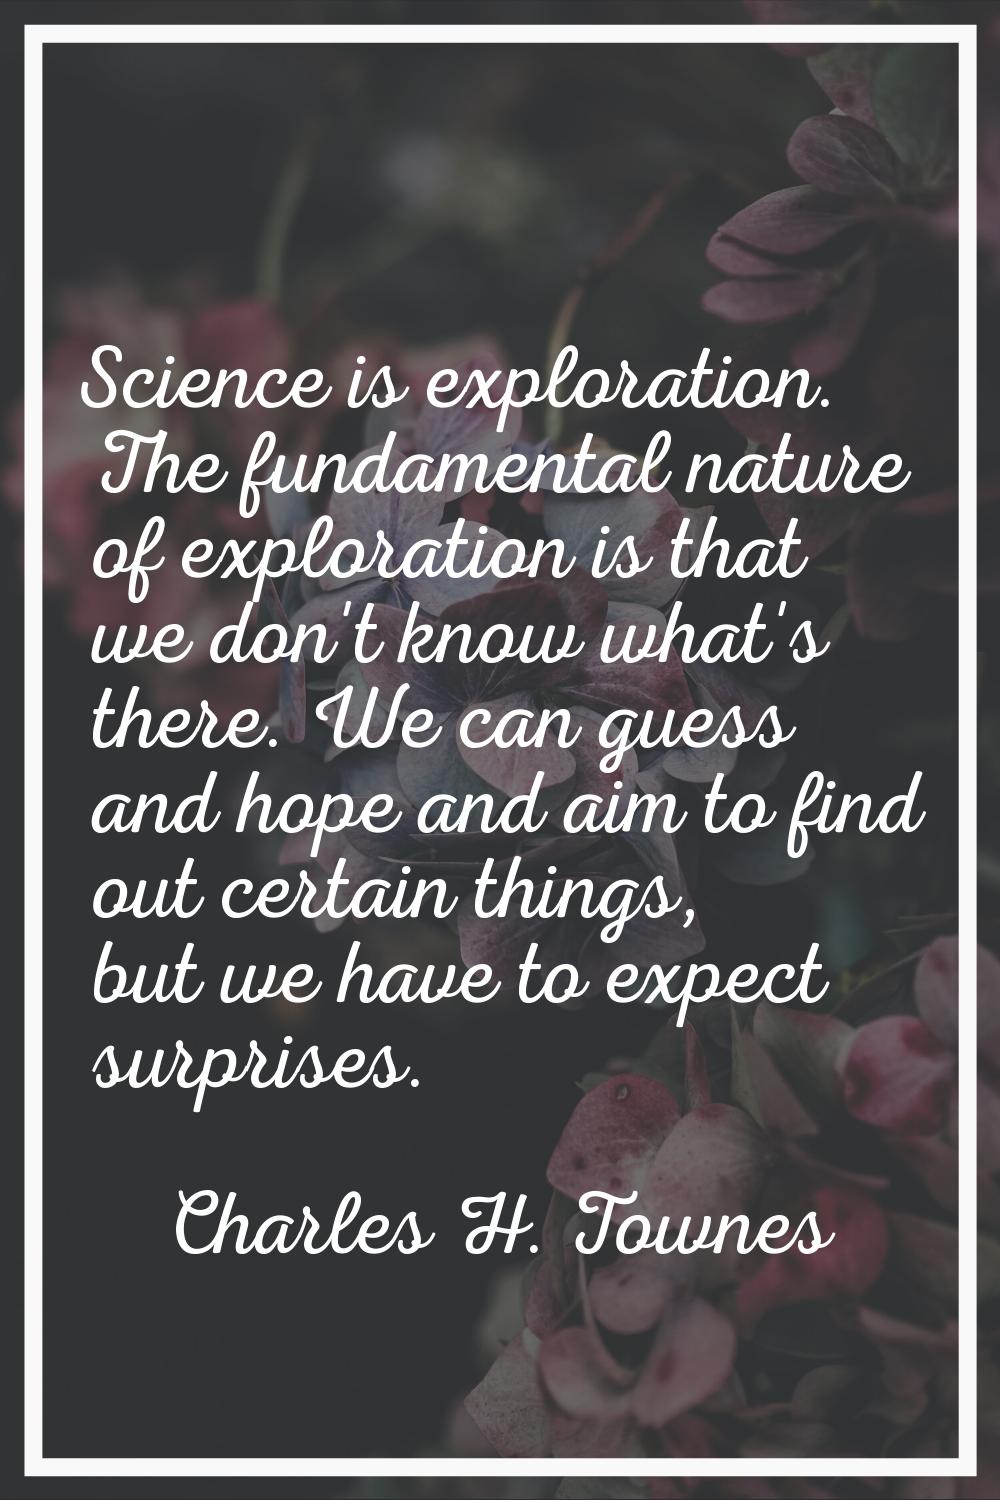 Science is exploration. The fundamental nature of exploration is that we don't know what's there. W